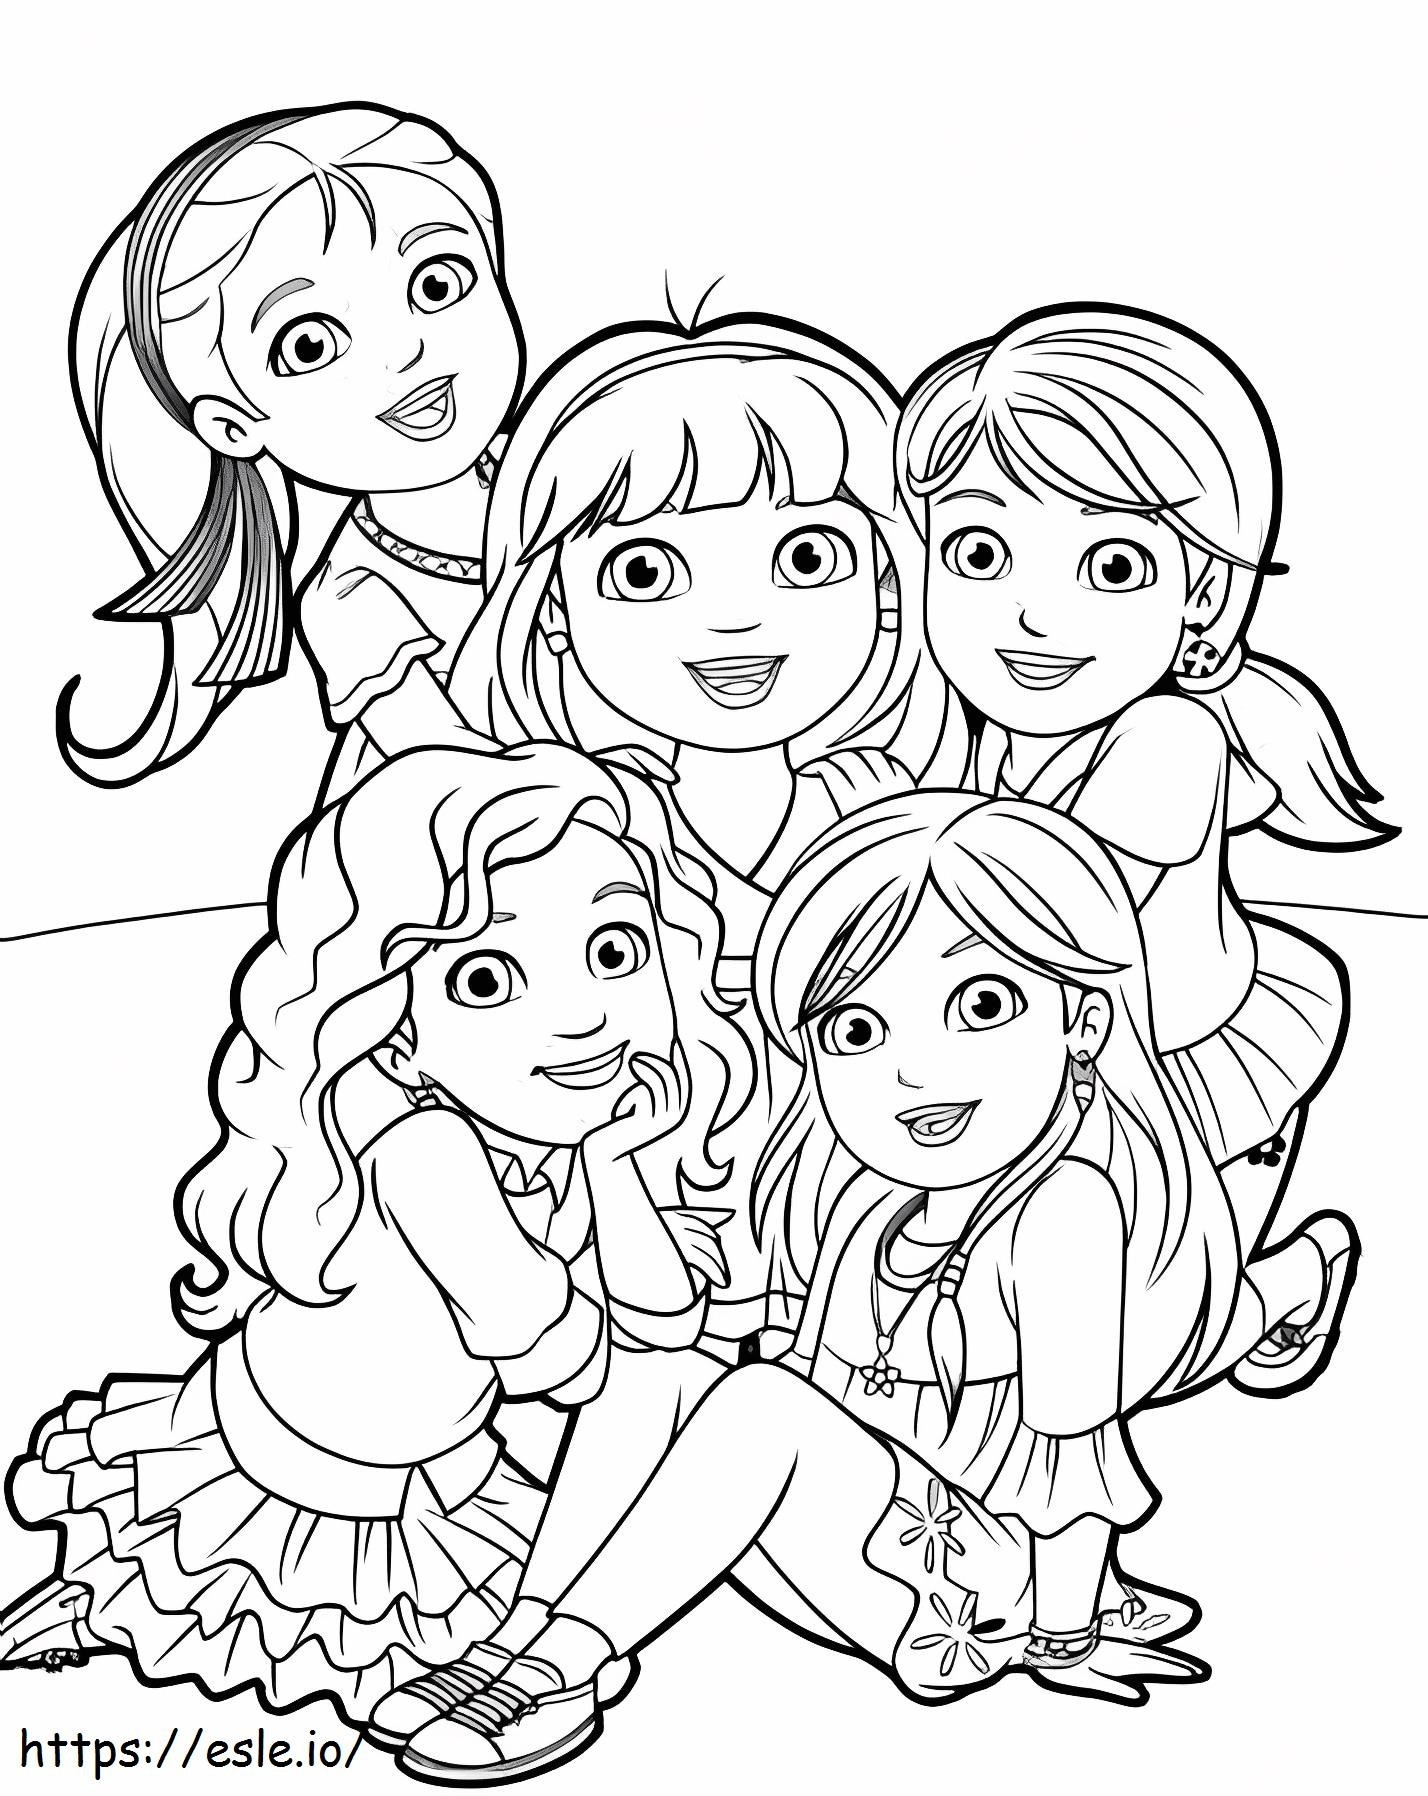 Five Friends coloring page